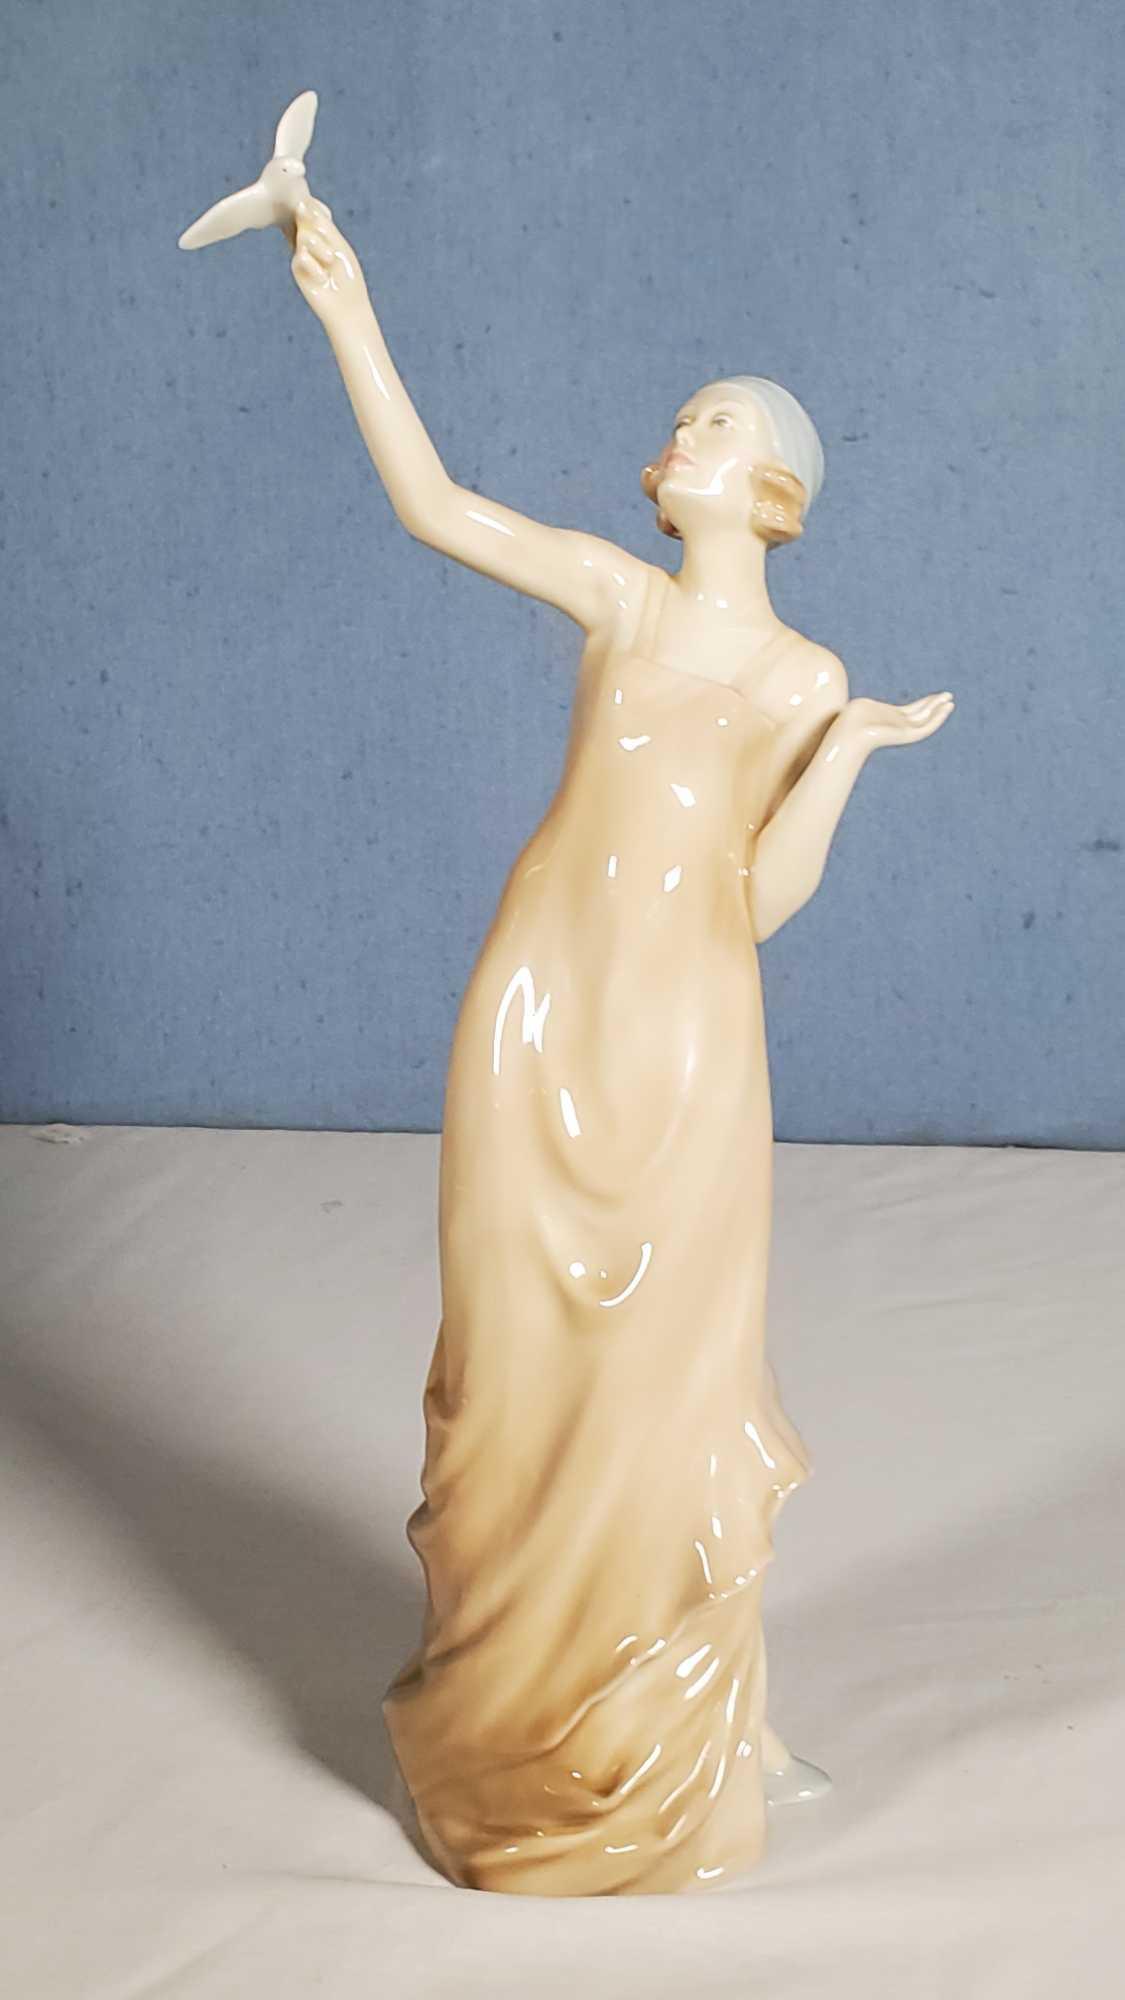 2 Royal Doulton Reflections Lady Figurines - Pomenade and Paradisese